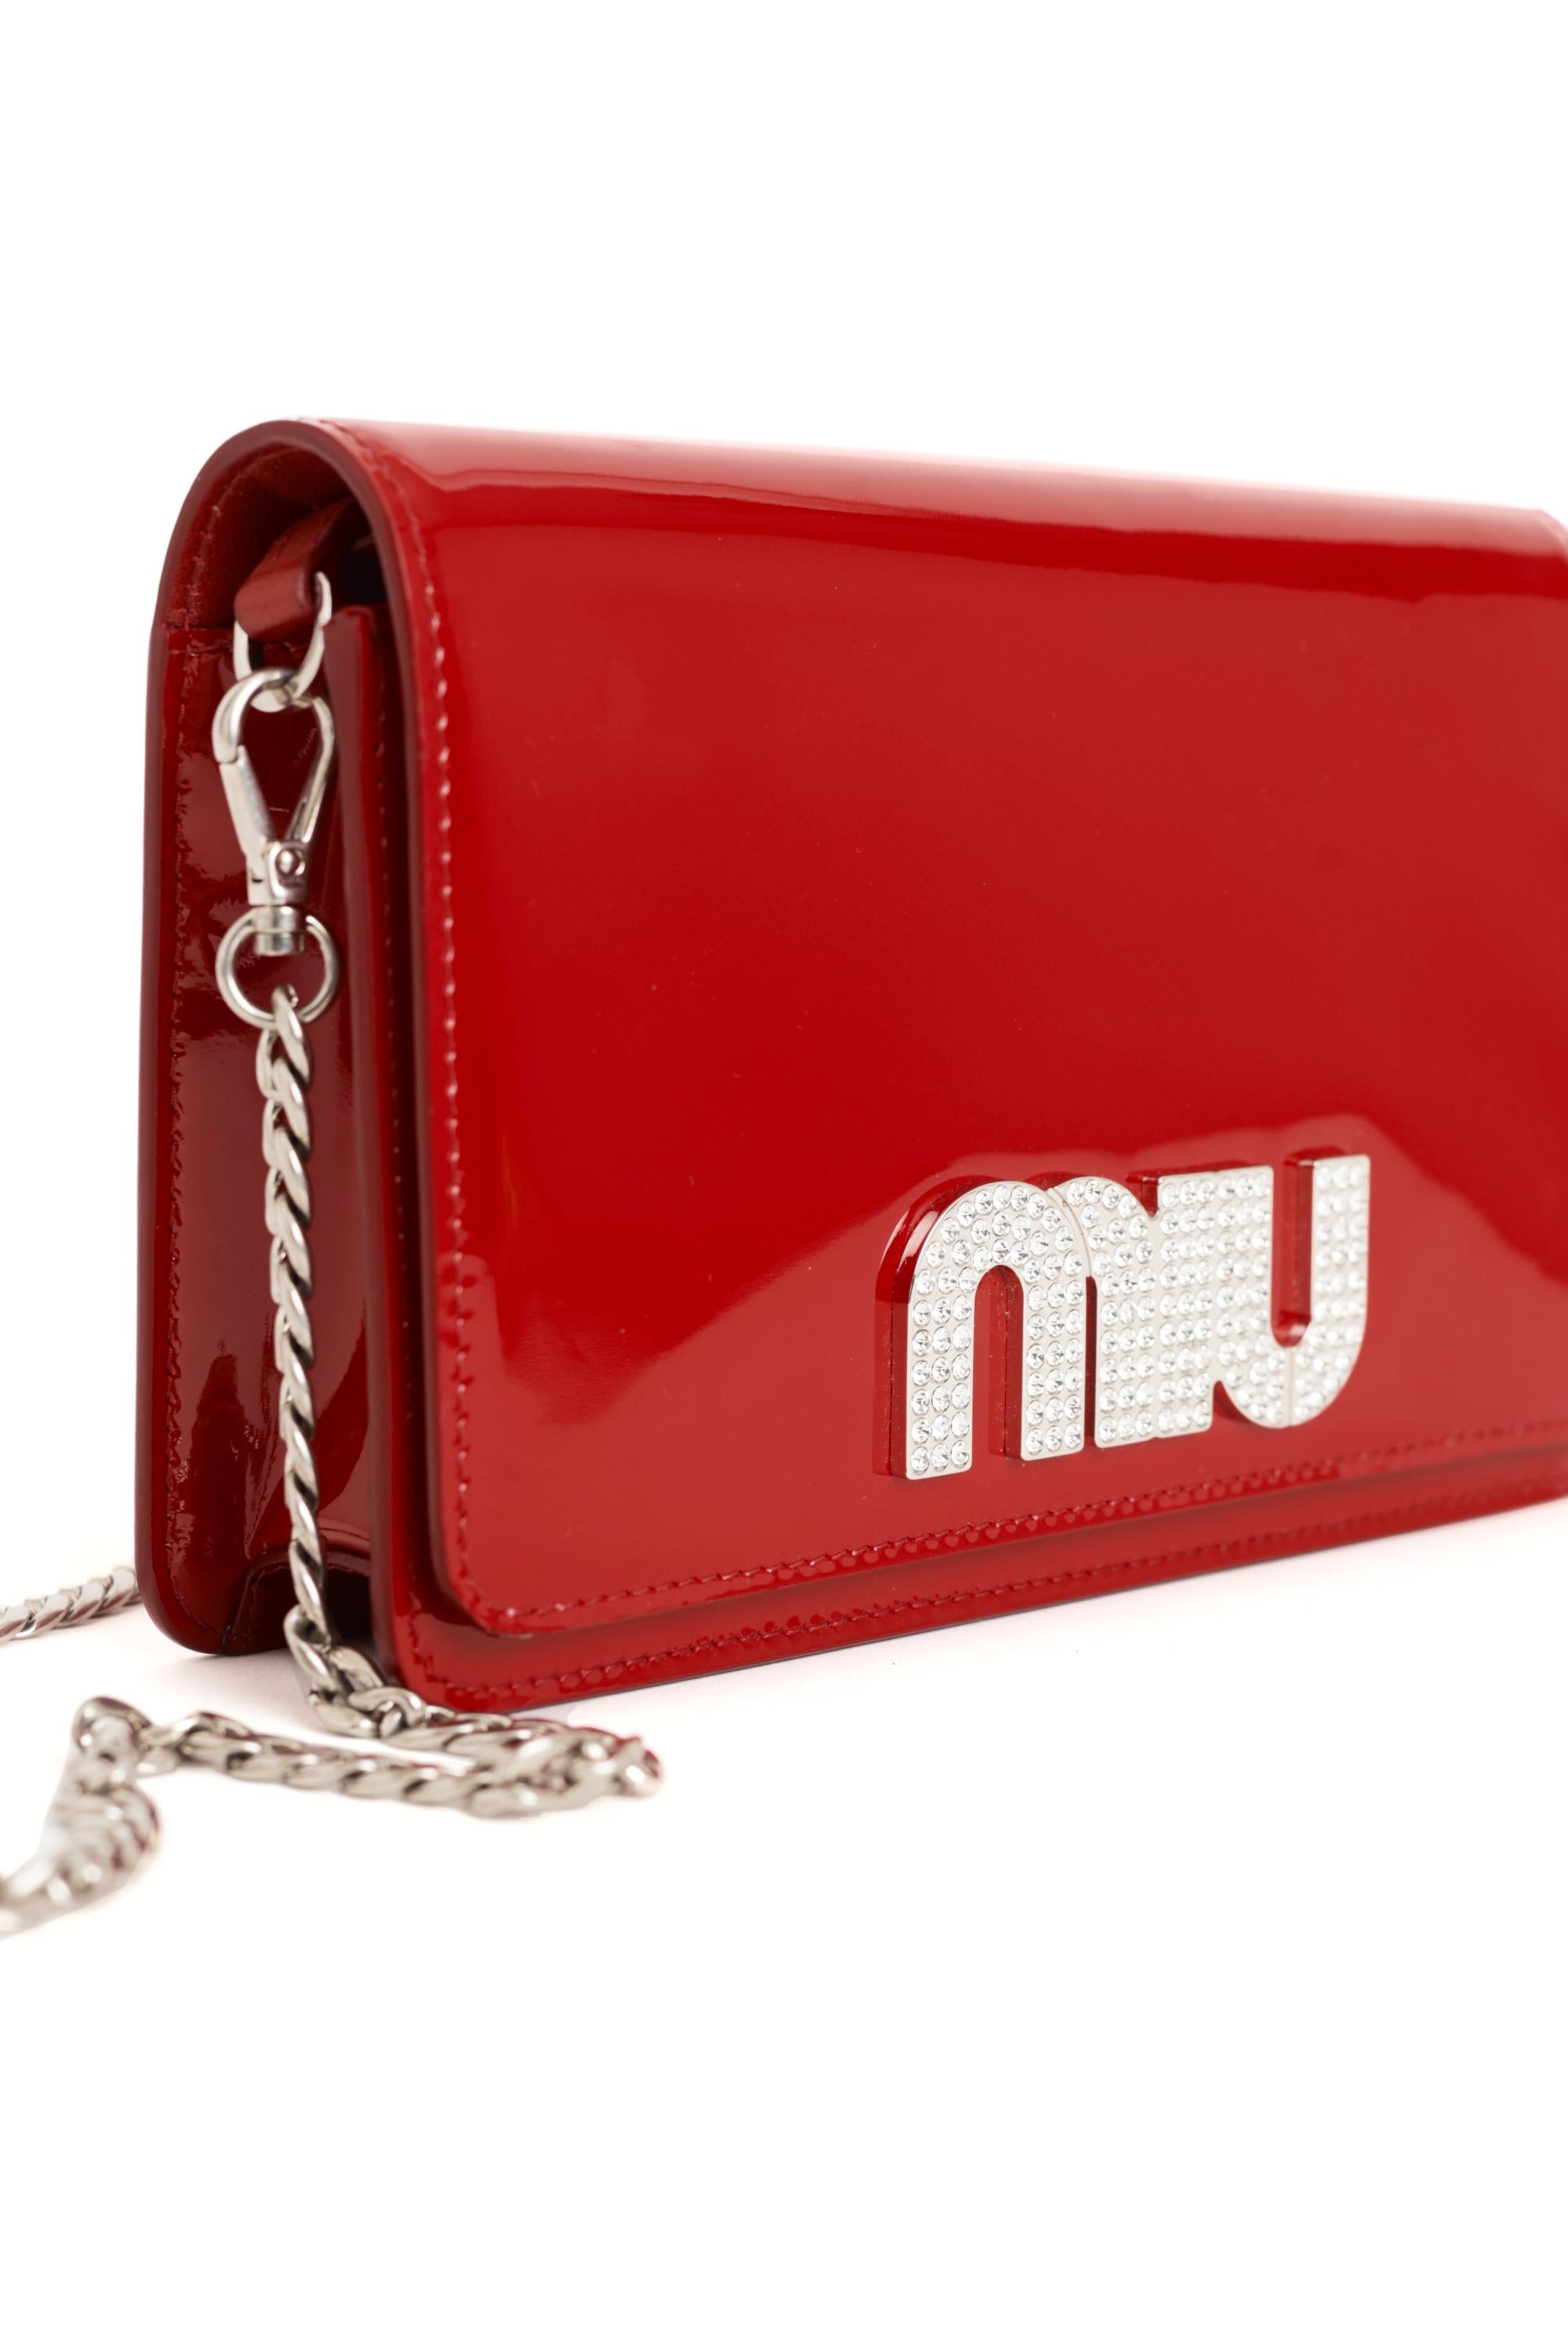 Miu Miu 2000’s Patent Leather Crossbody Bag In Good Condition For Sale In London, GB